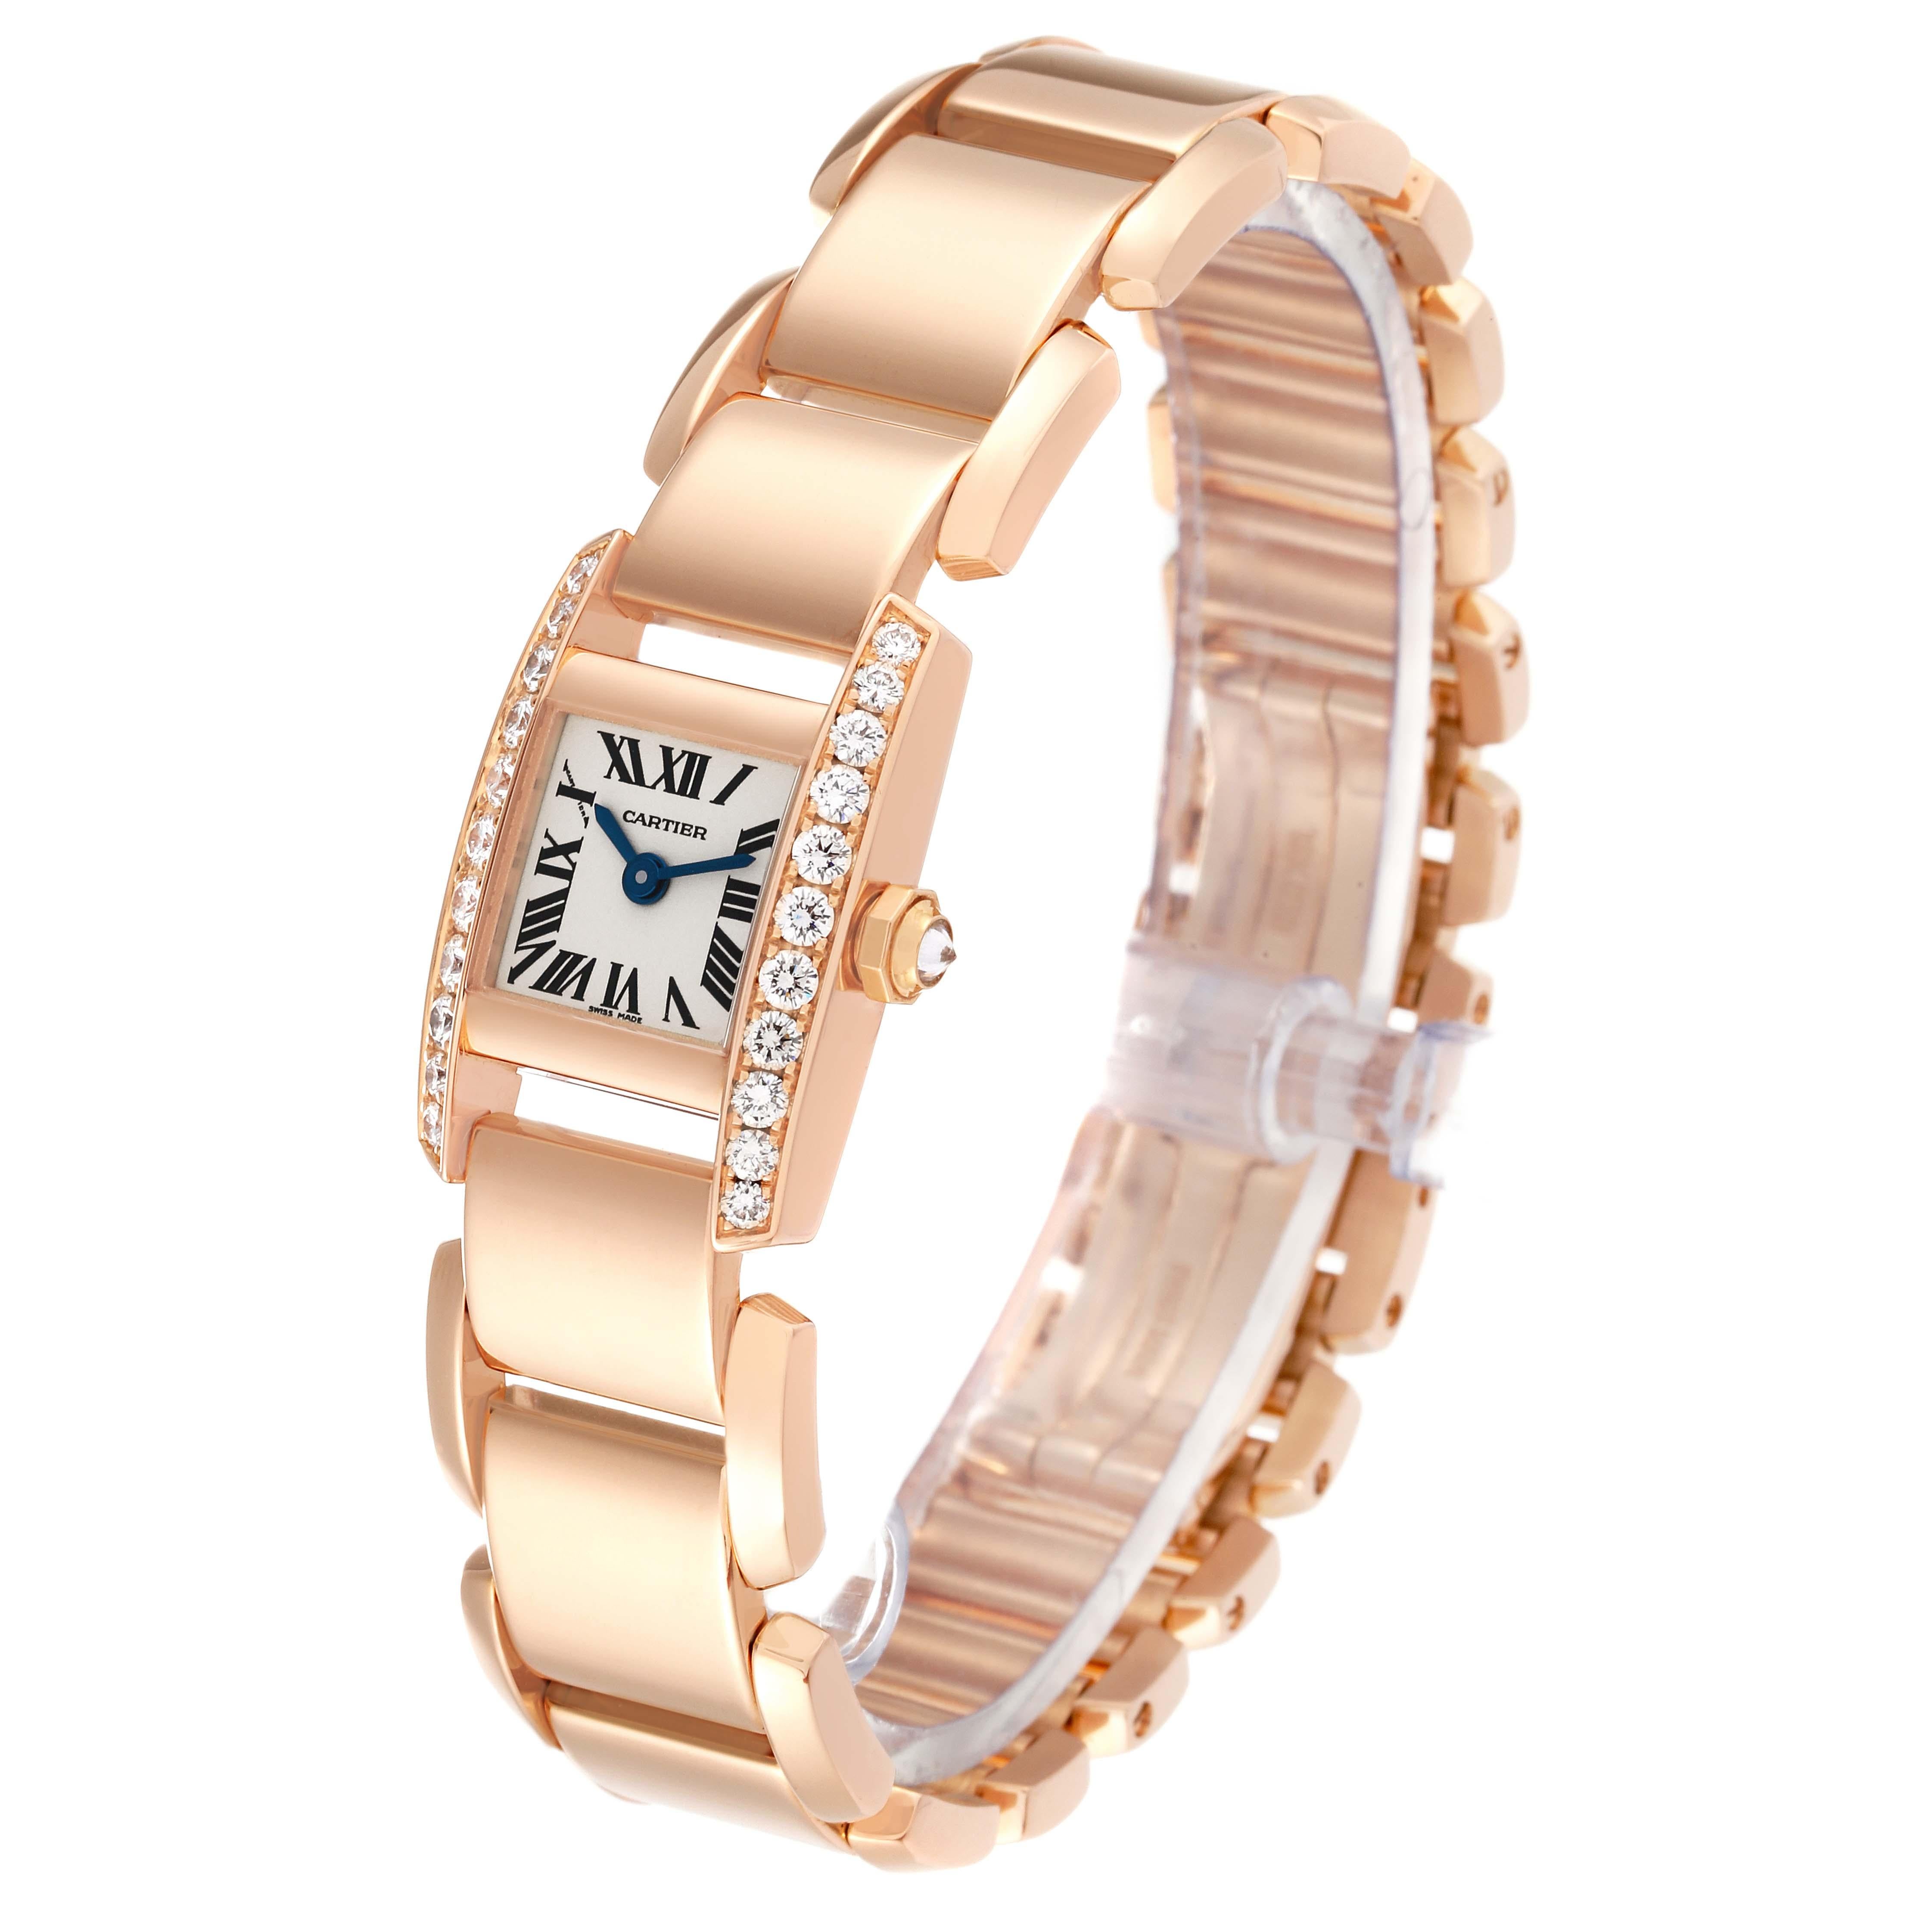 Cartier Tankissime Silver Dial Rose Gold Diamond Ladies Watch WE70058H In Excellent Condition For Sale In Atlanta, GA